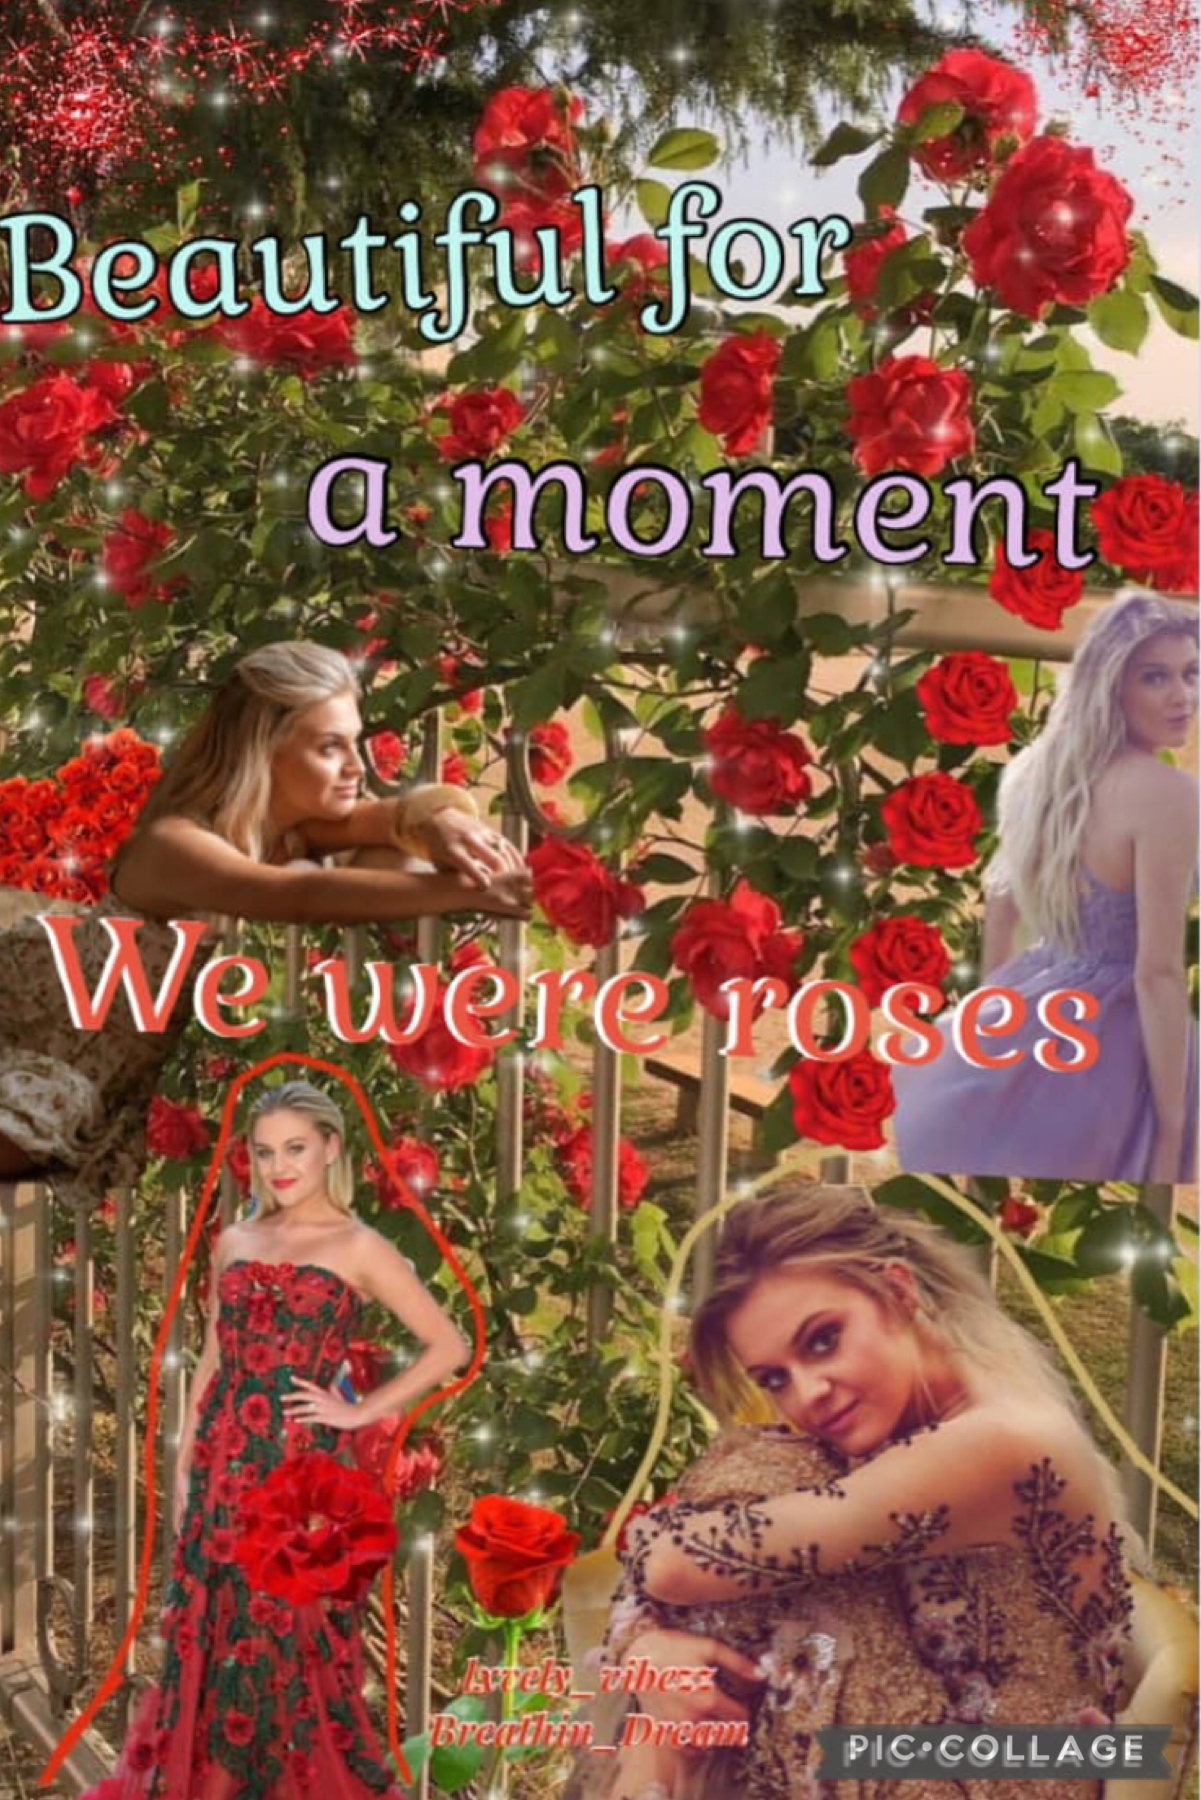 Rose by Kelsea Ballerini 19.8.21 collaboration with the amazing Lxvely_vibezz